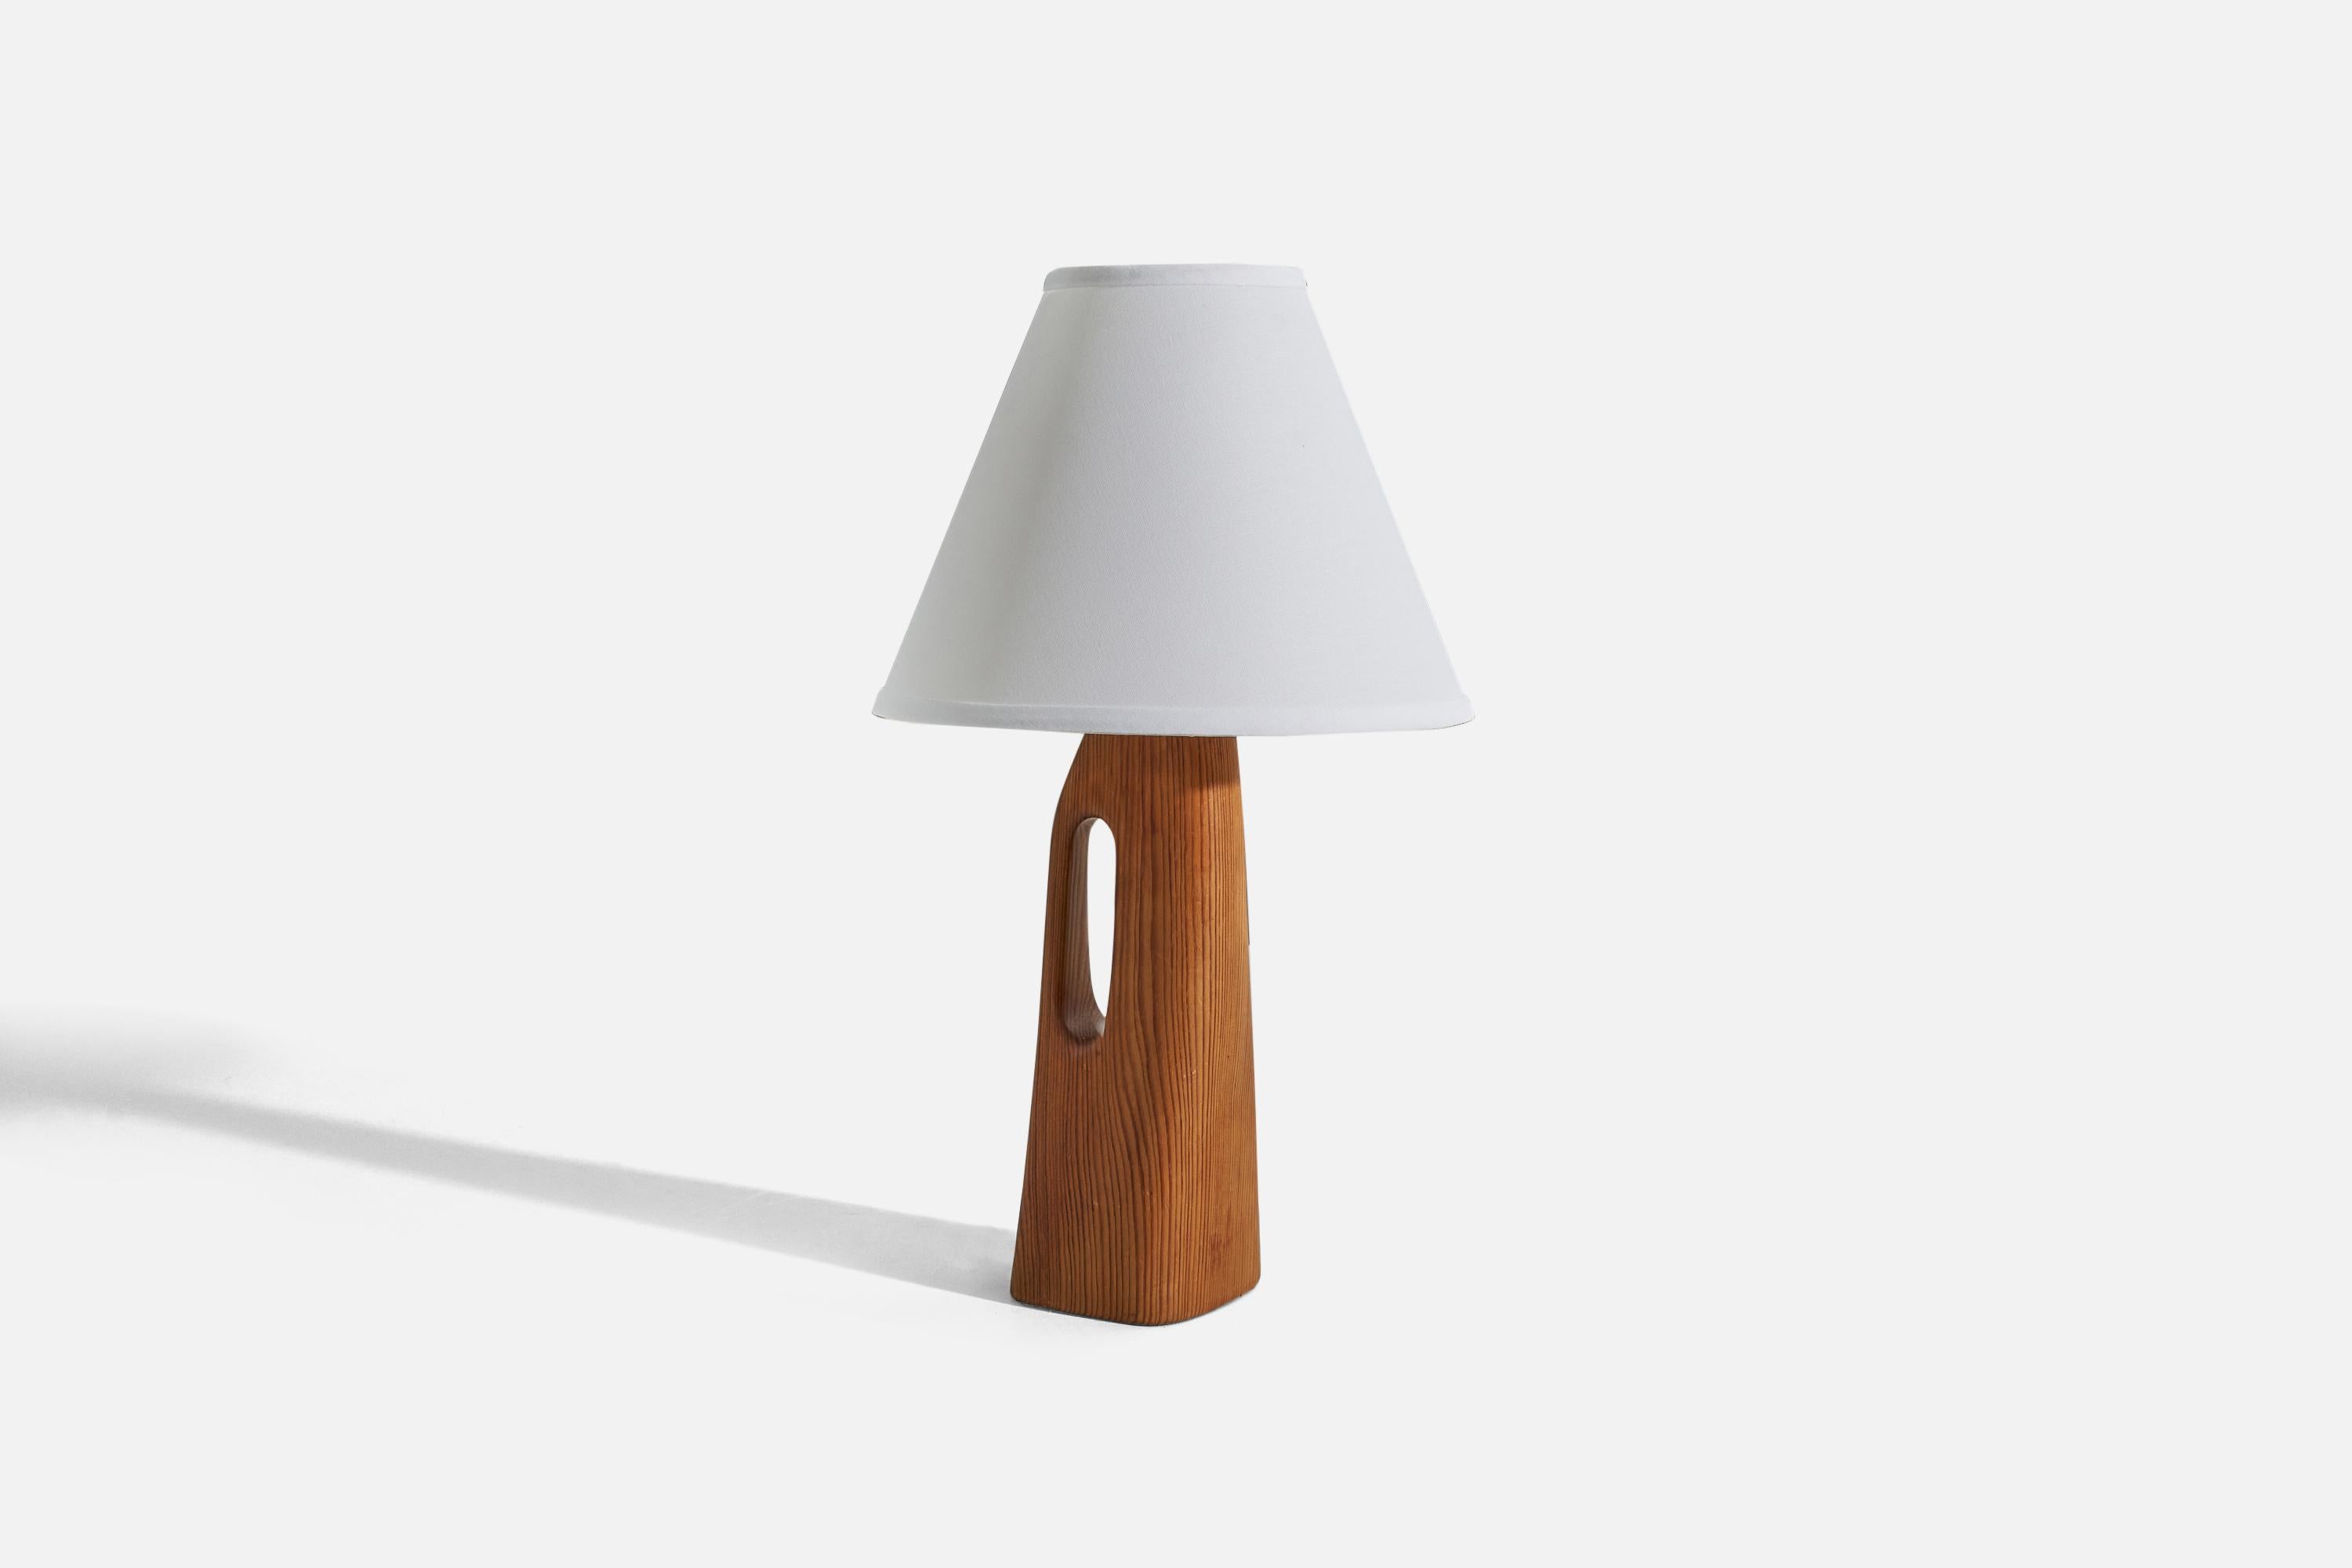 A pine table lamp designed and produced in Sweden, c. 1960s. 

Sold without lampshade. 
Dimensions of lamp (inches) : 12.87 x 3.87 x 3.75 (H x W x D)
Dimensions of shade (inches) : 4.25 x 10.25 x 8 (T x B x S)
Dimension of lamp with shade